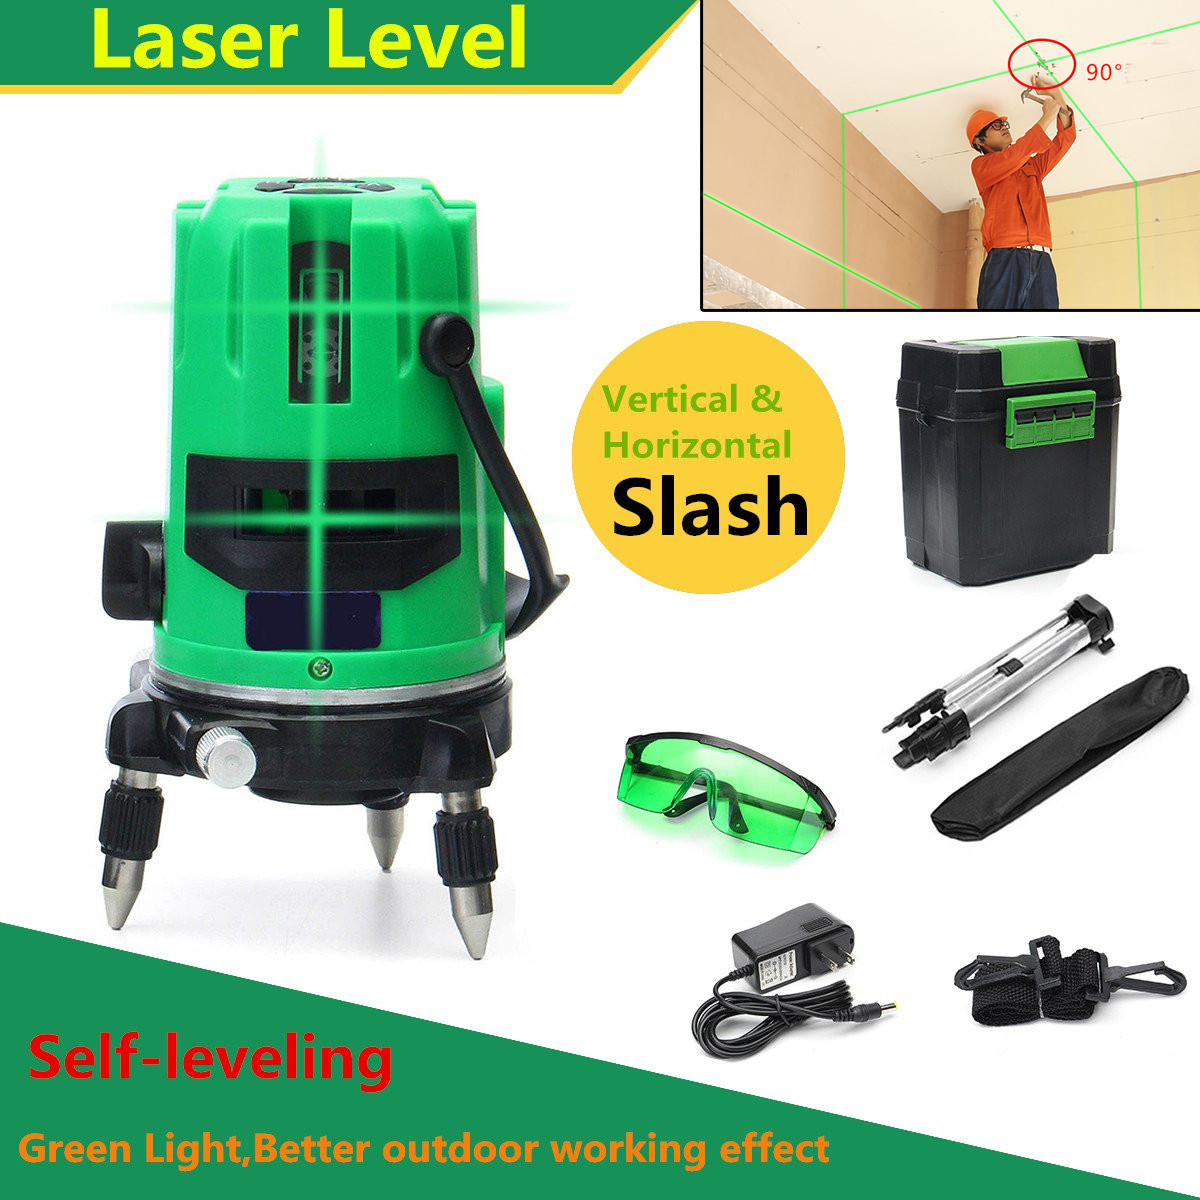 Green-3-Line-4-Points-Laser-Level-360-Rotary-Laser-Line-Self-Leveling-with-Tripod-1166737-2